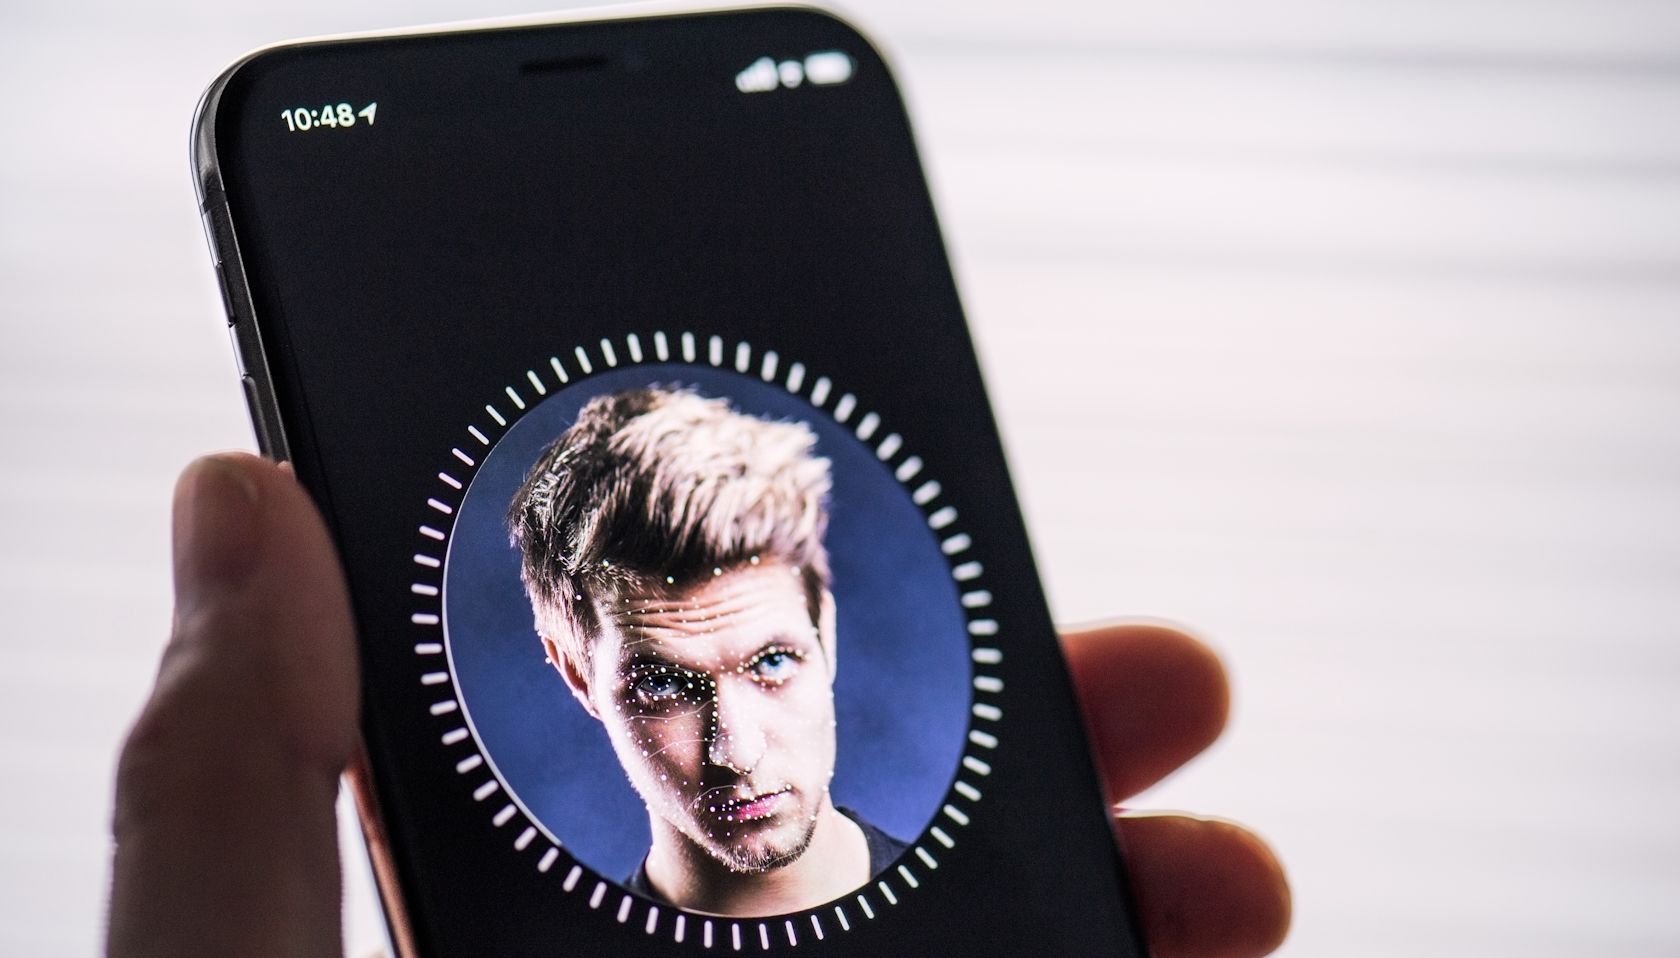 An iPhone user setting up Face ID